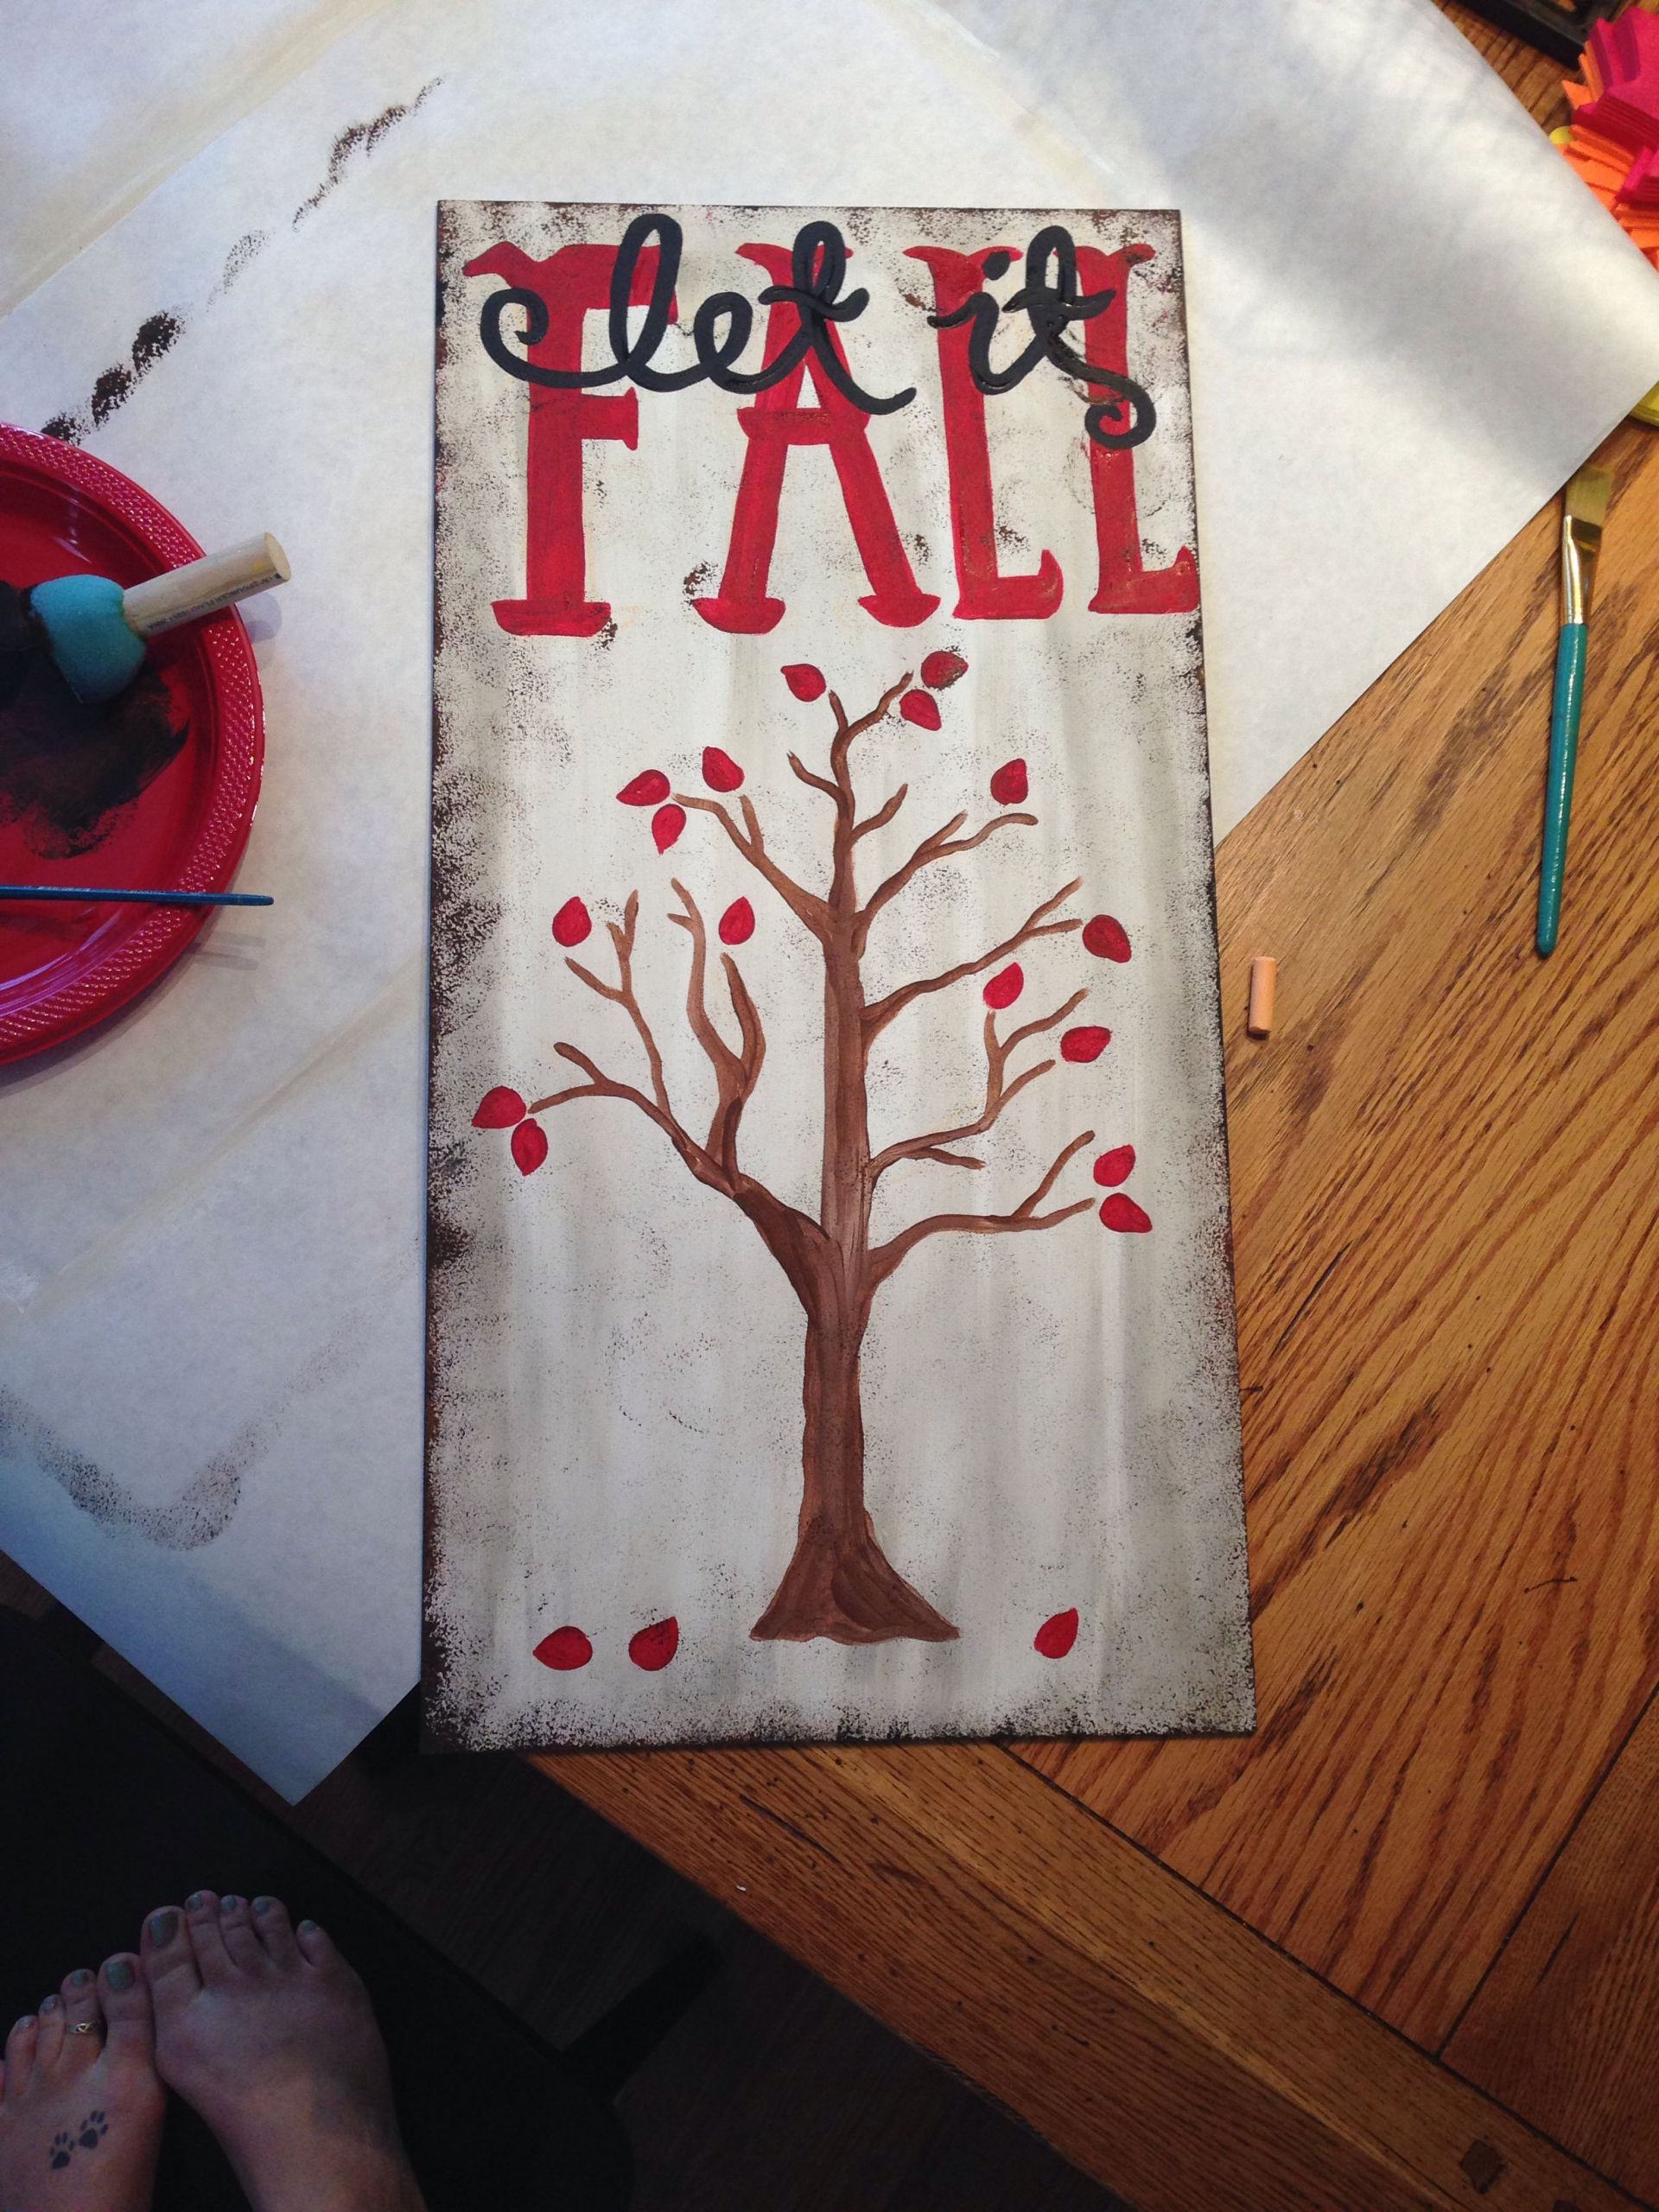 Wooden Sign Craft Ideas
 "Let it fall" wooden sign Craft Ideas